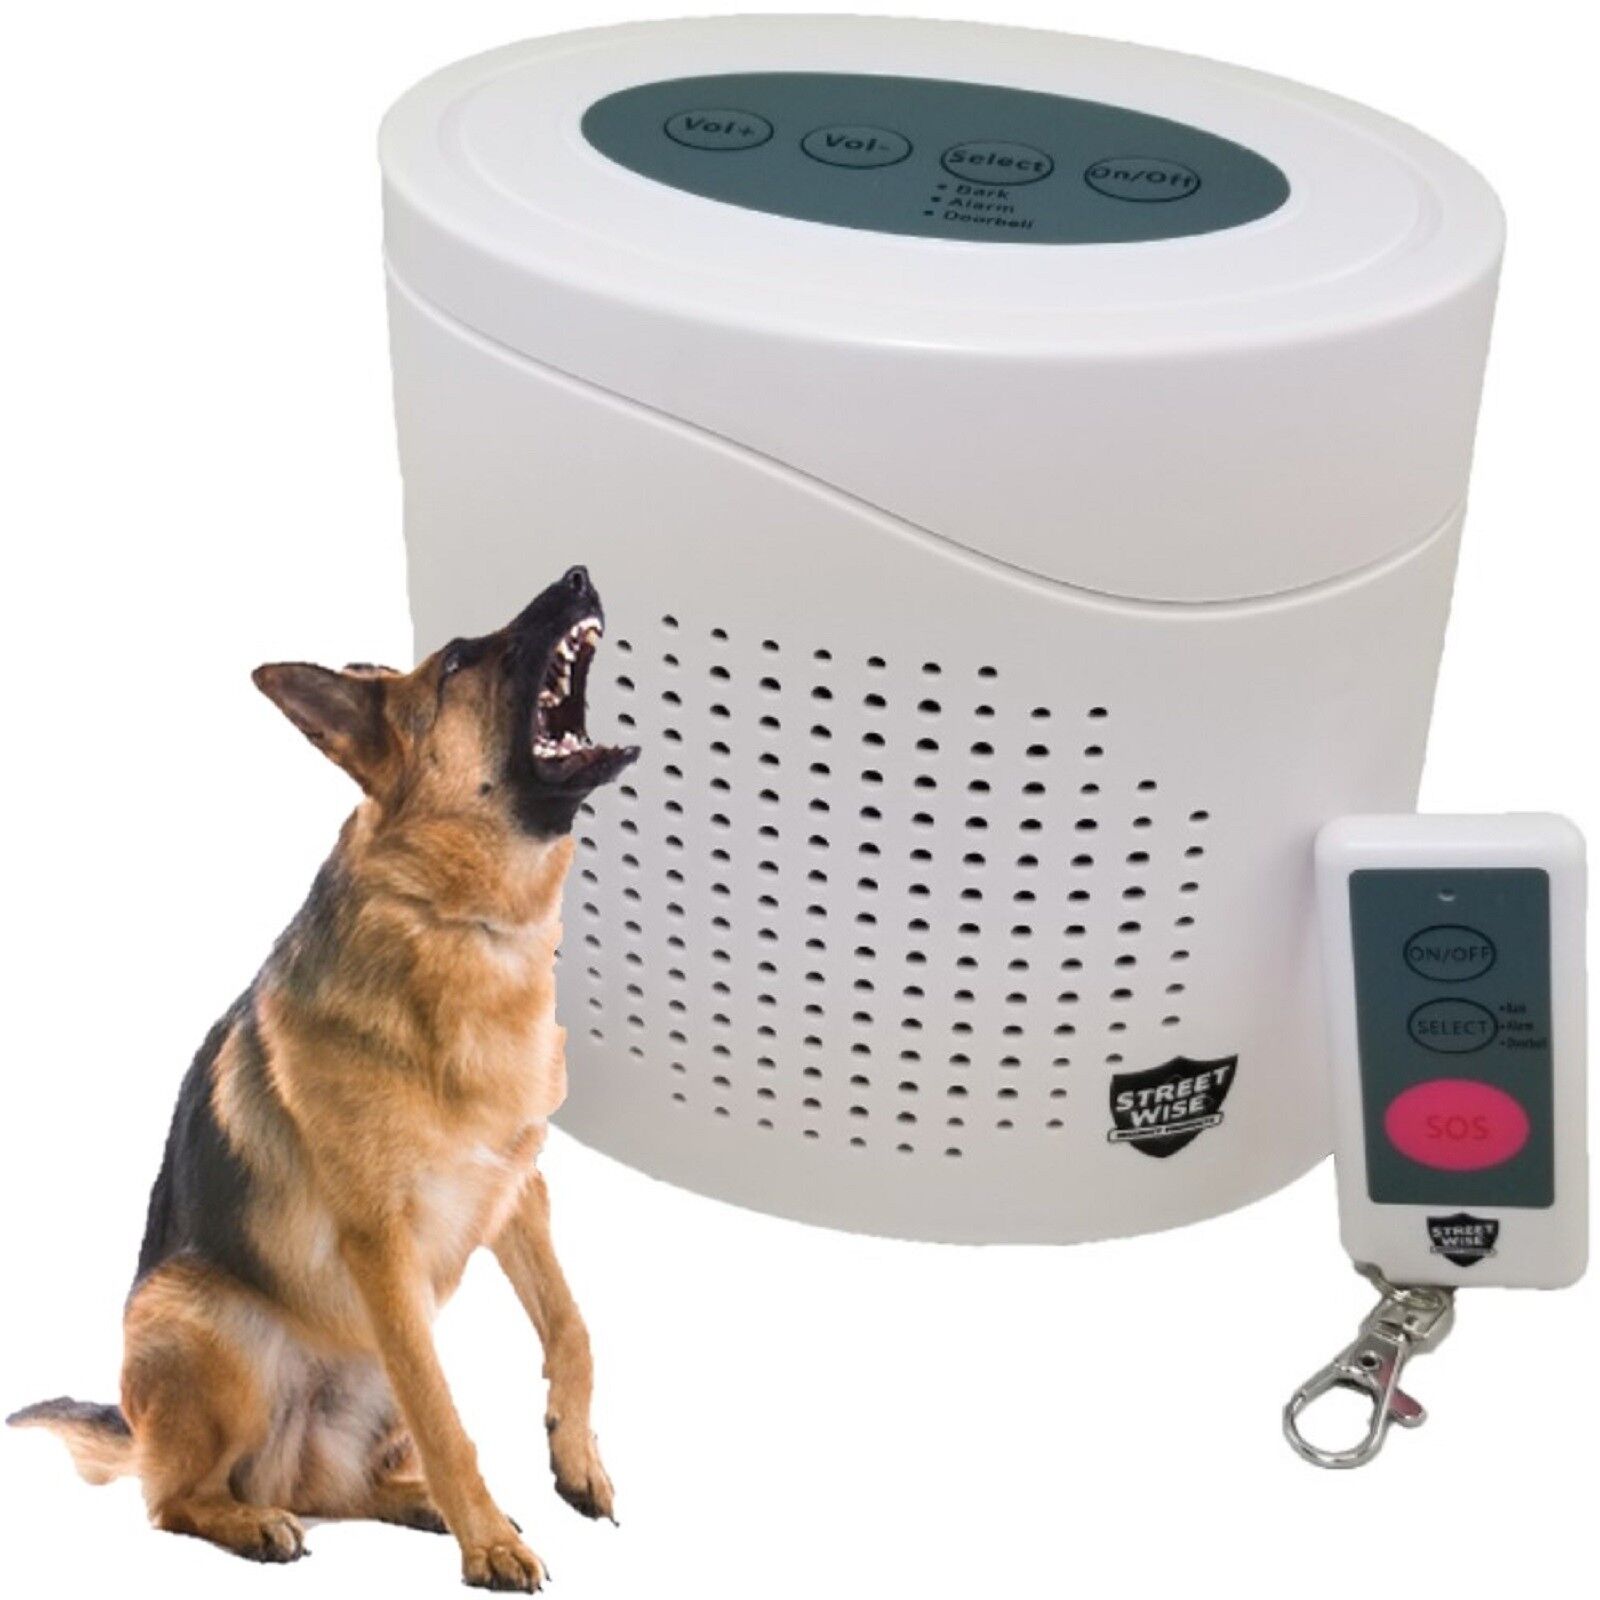 Will a dog set off a motion detector?